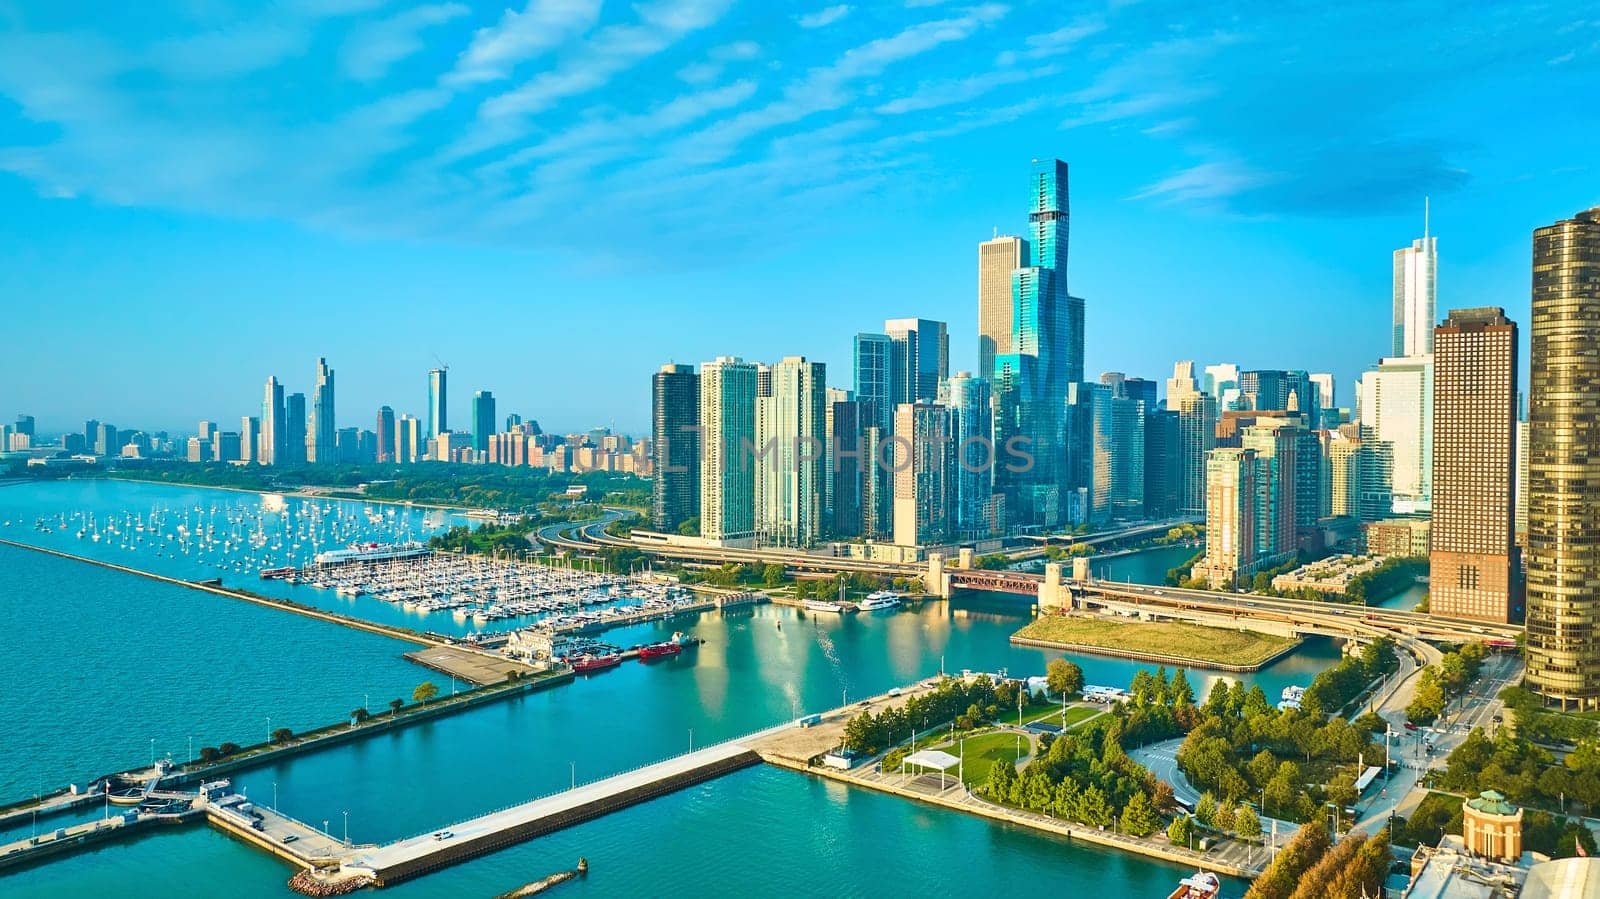 Lake Michigan coastline from Chicago, IL with Navy Pier and city skyscrapers in summer aerial by njproductions